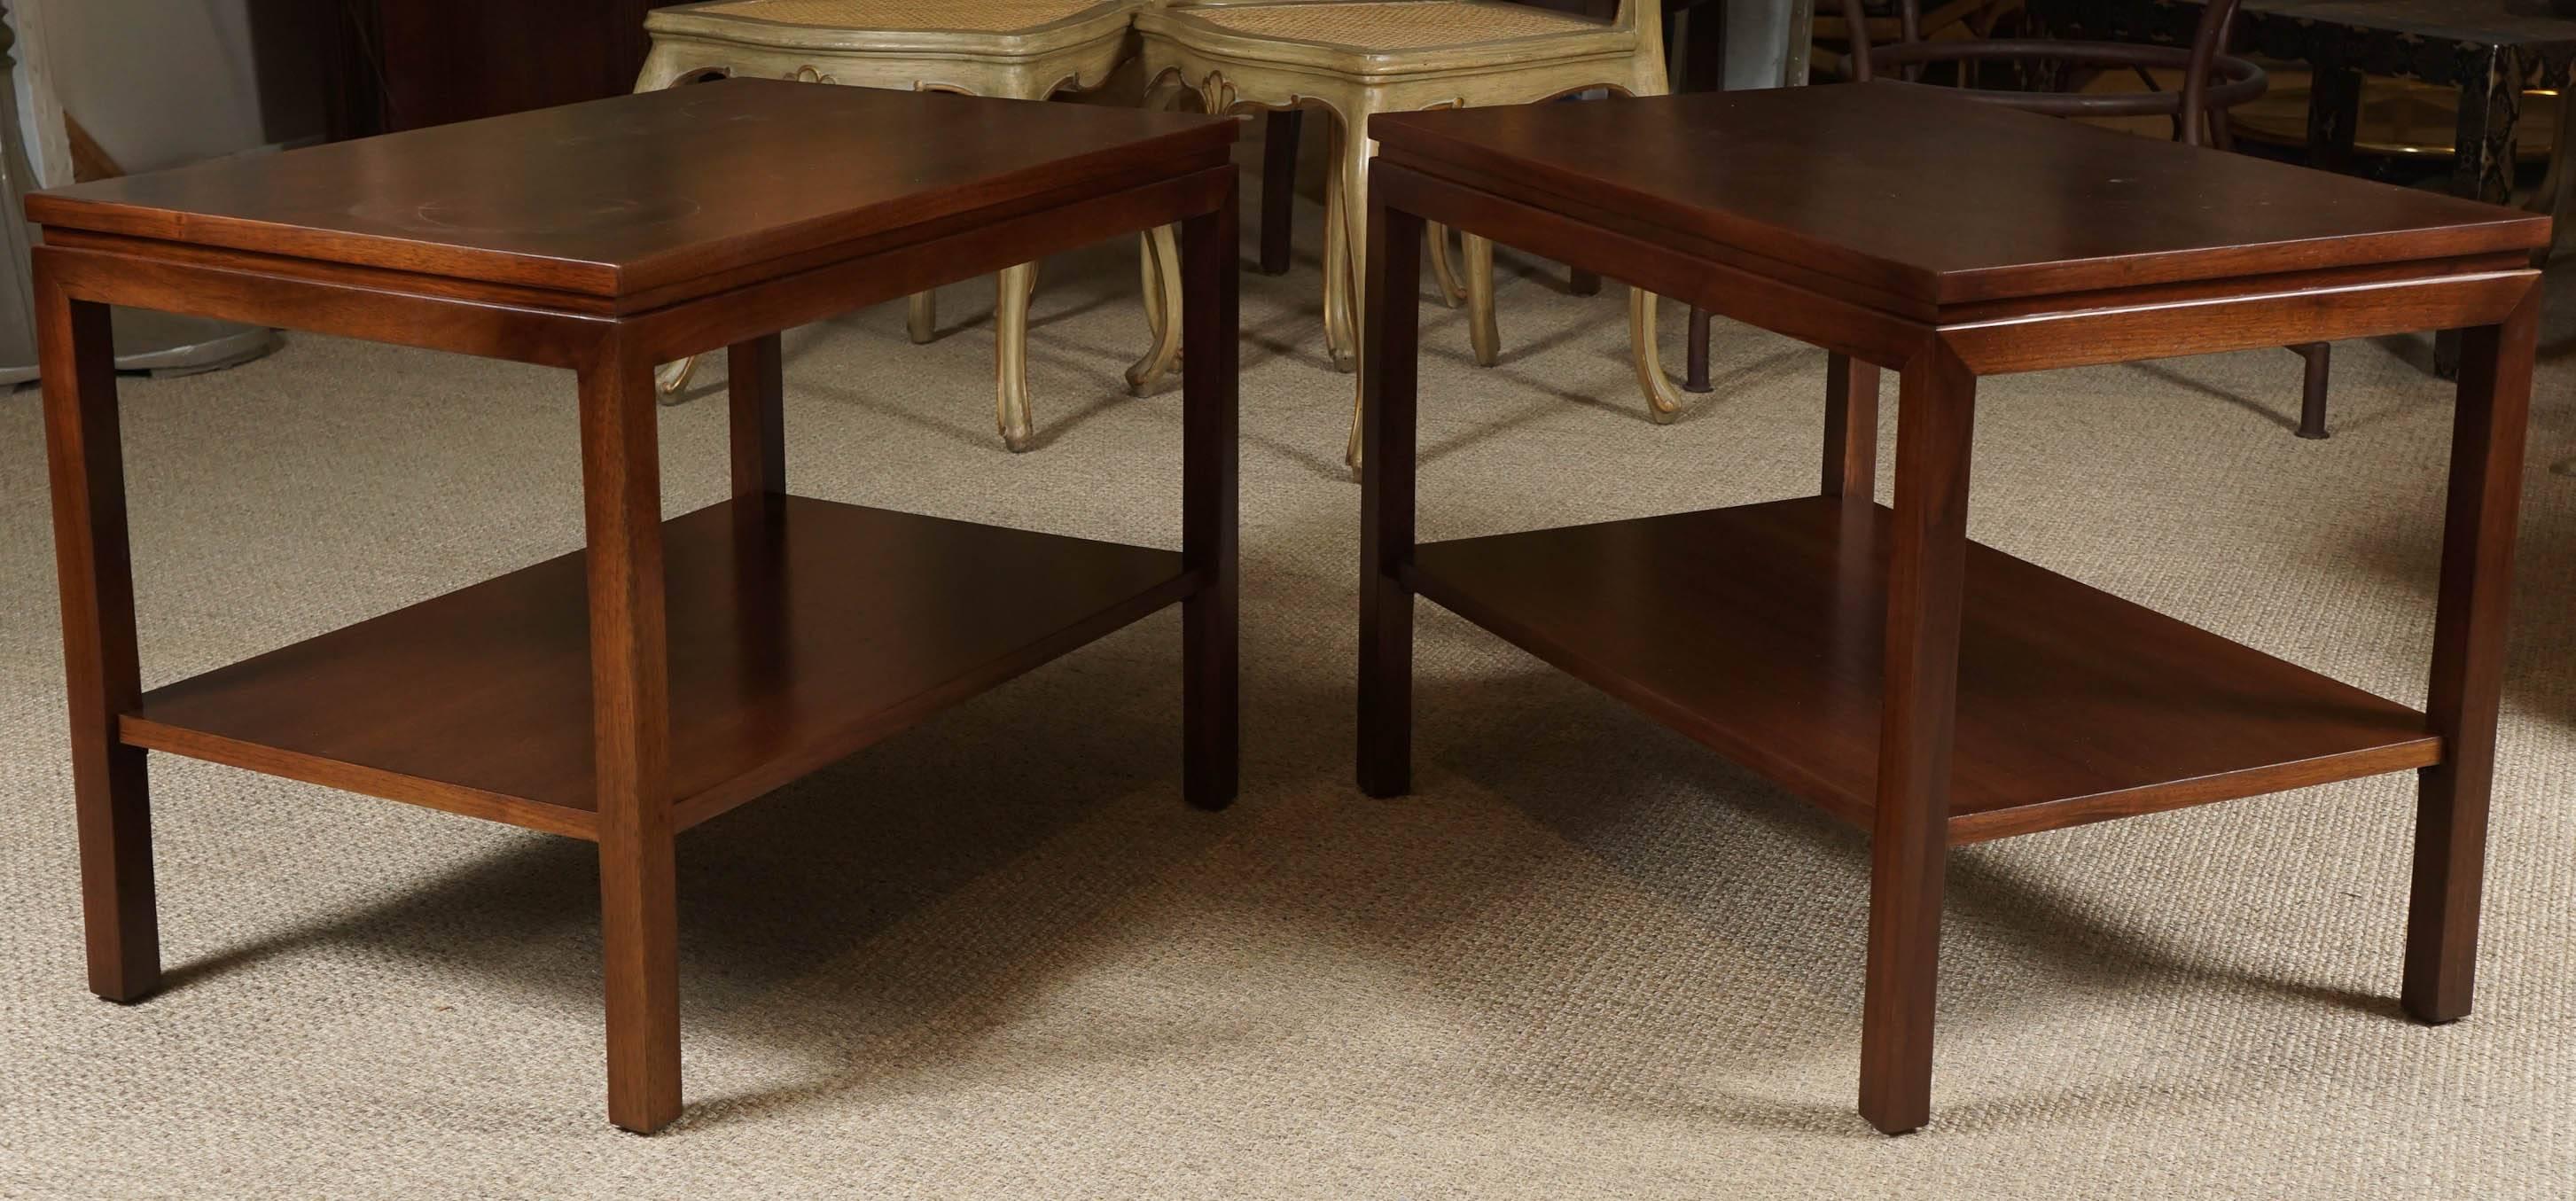 American Pair of Modern Walnut End Tables with Shelves